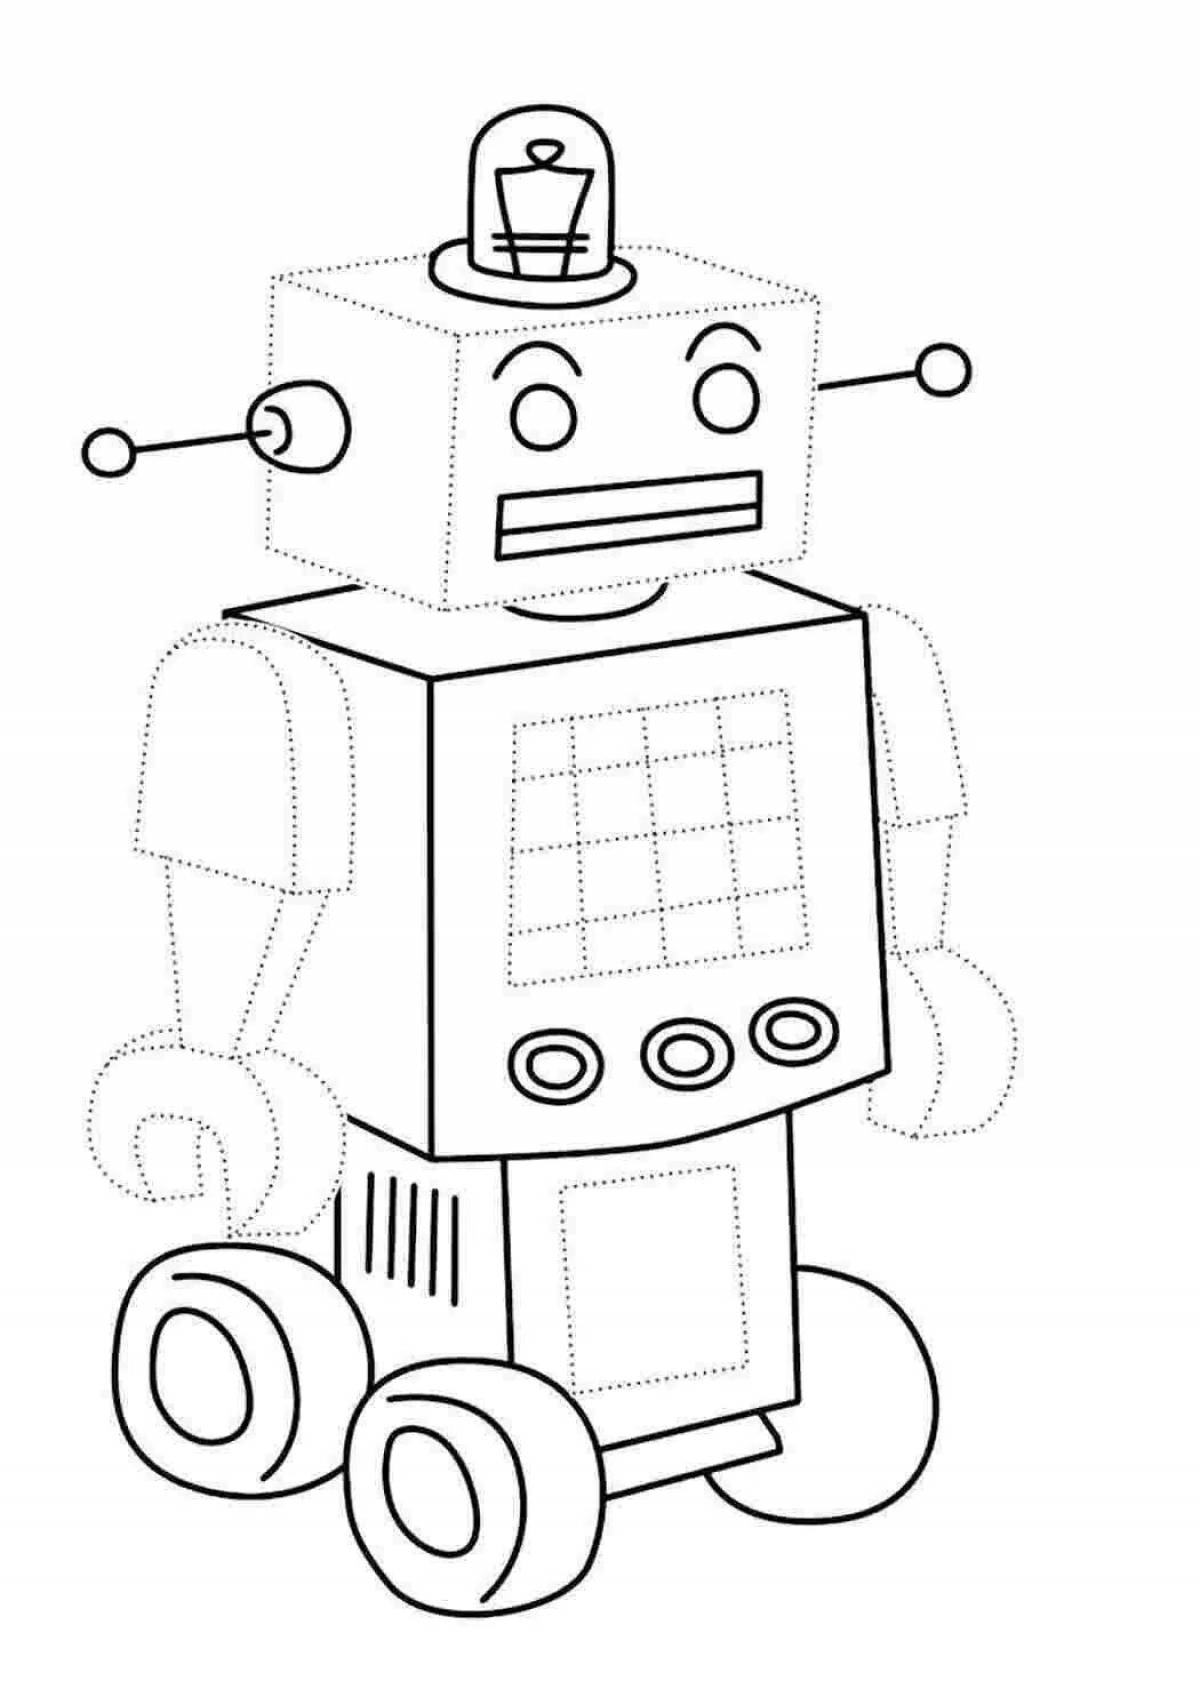 Outstanding robot coloring page for kids